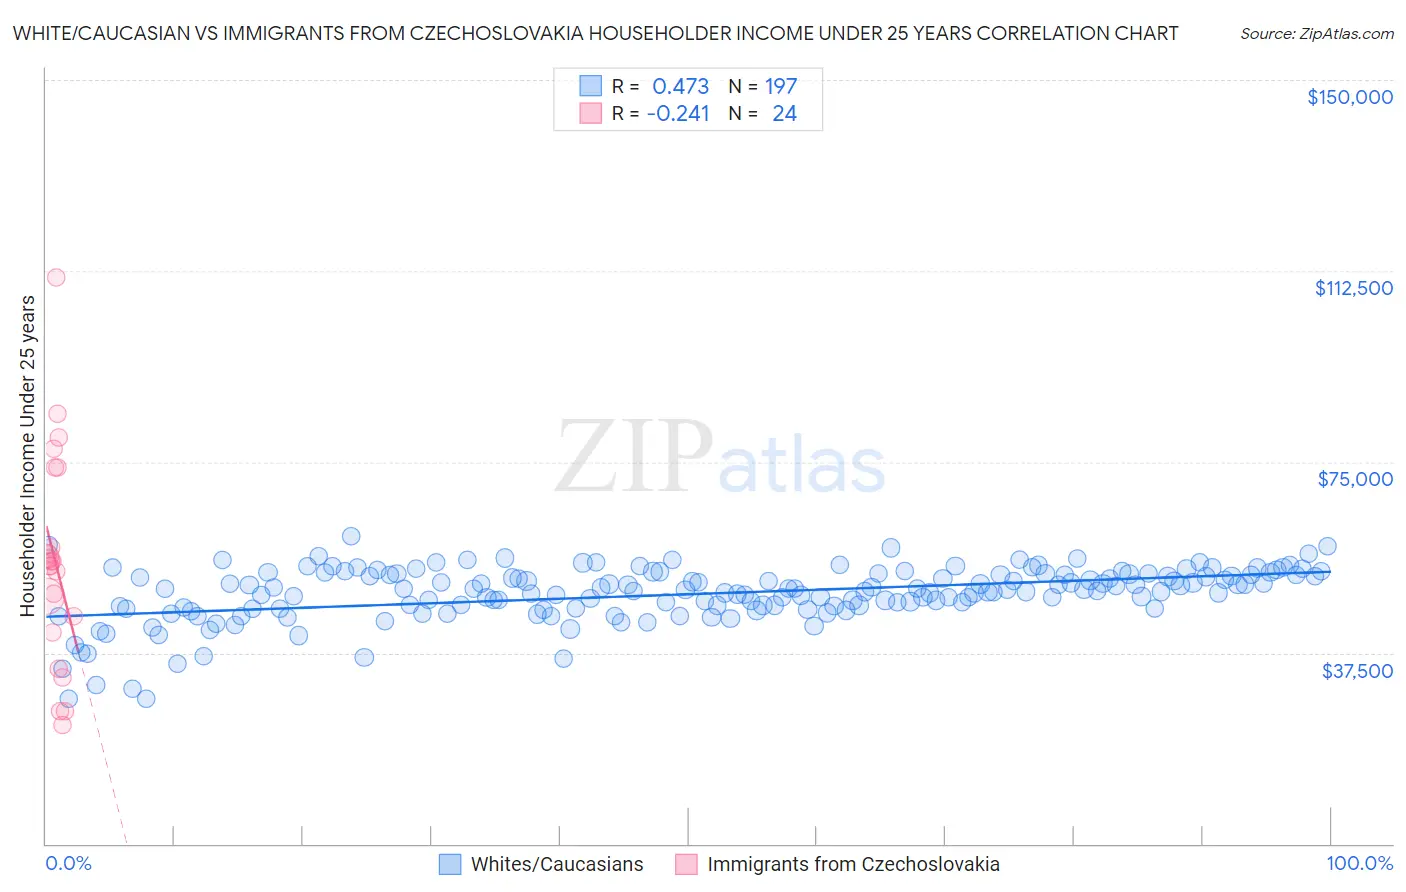 White/Caucasian vs Immigrants from Czechoslovakia Householder Income Under 25 years